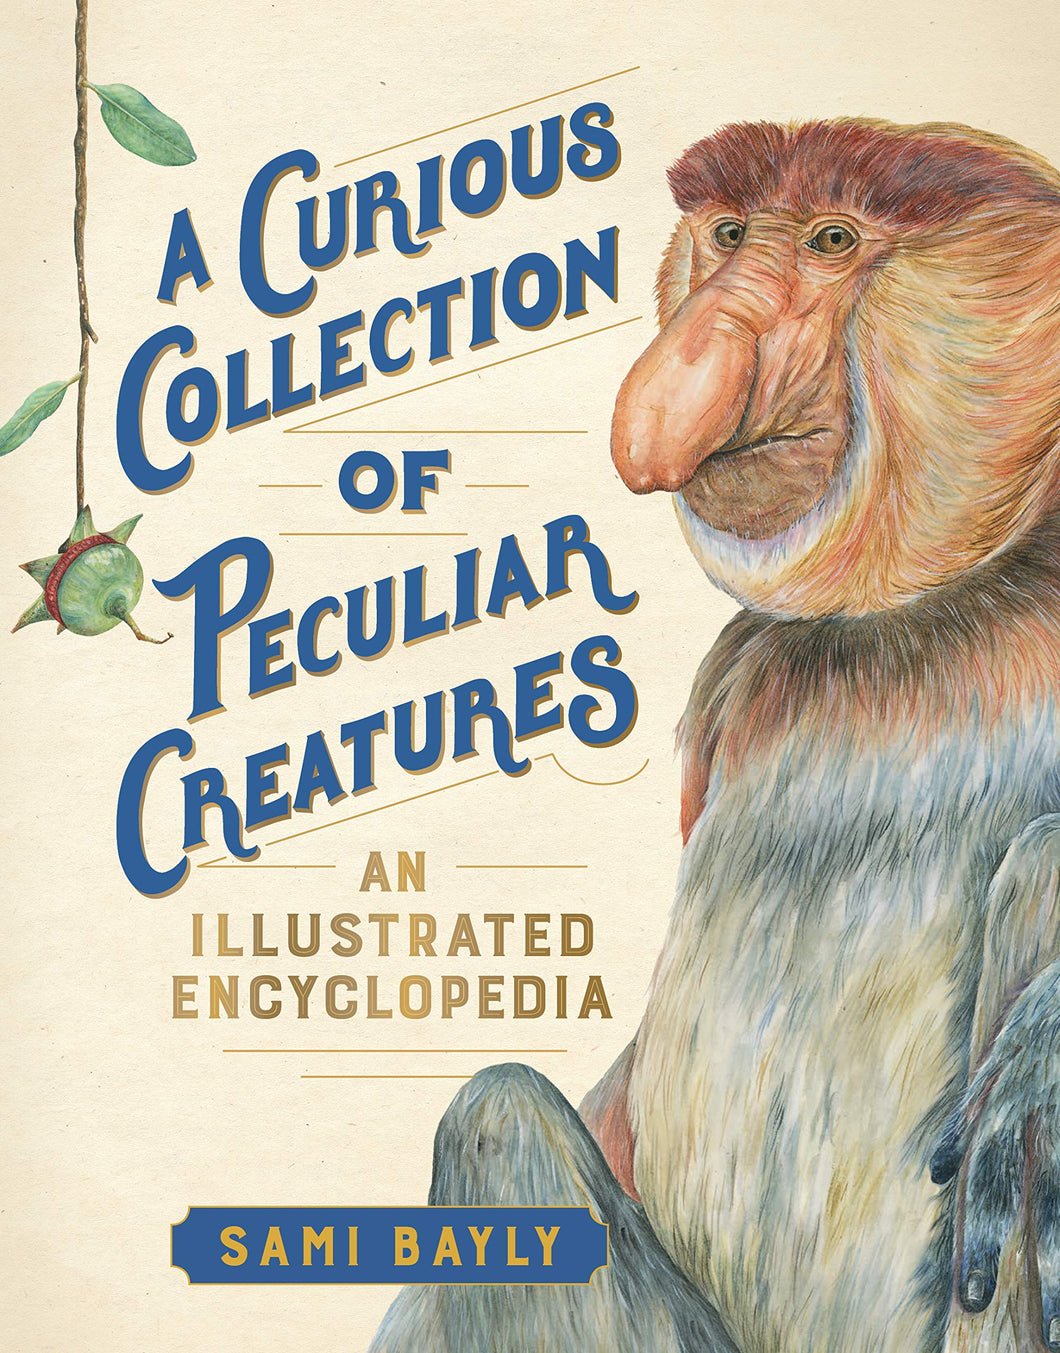 A Curious Collection of Peculiar Creatures: An Illustrated Encyclopedia Hardcover